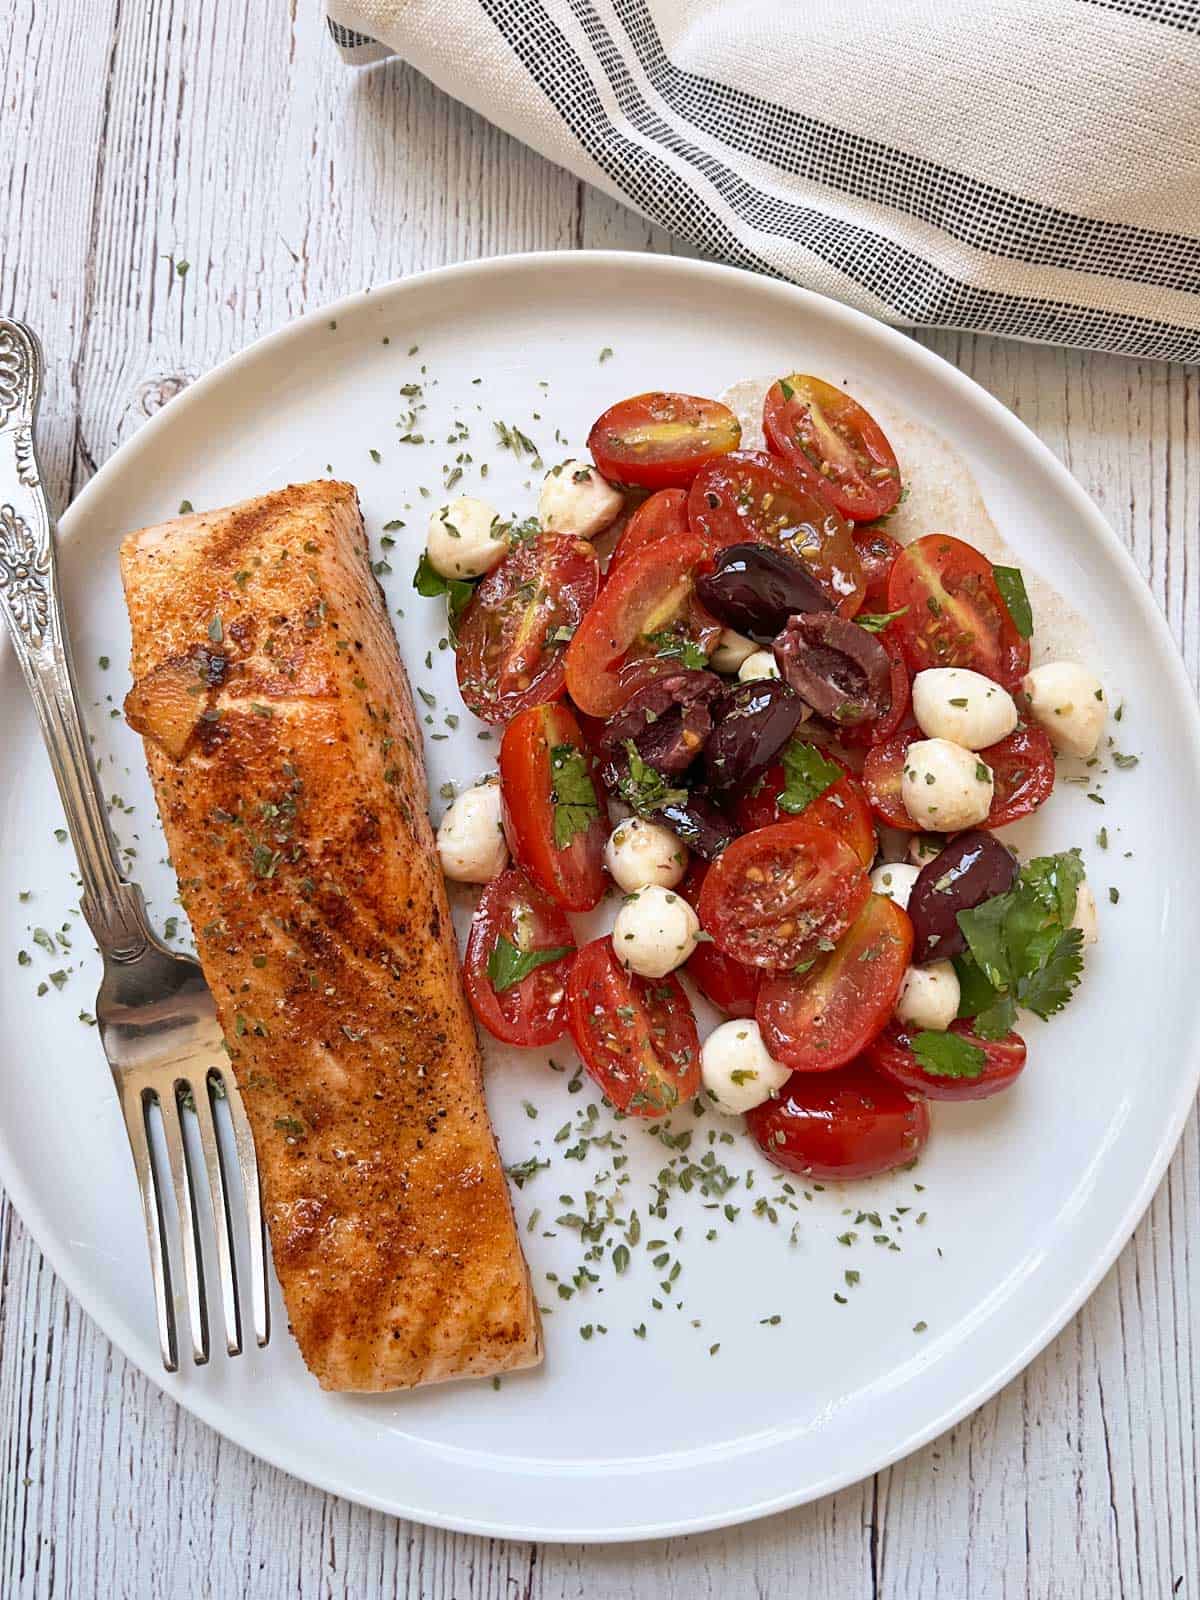 Pan-seared salmon is served with tomato salad.